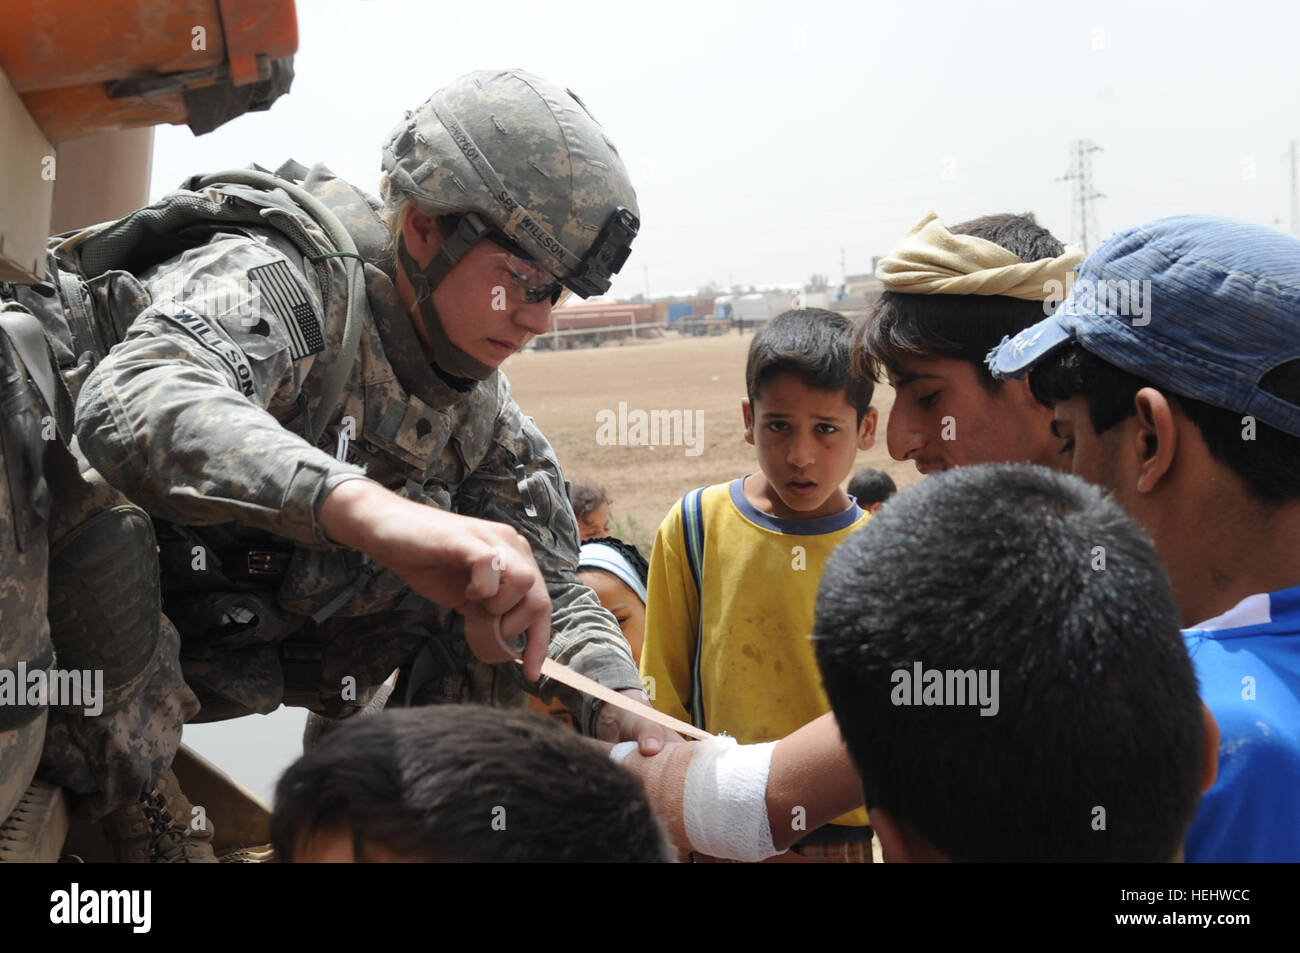 U.S. Army Spc. David Tunstall pulls security as fellow soldiers